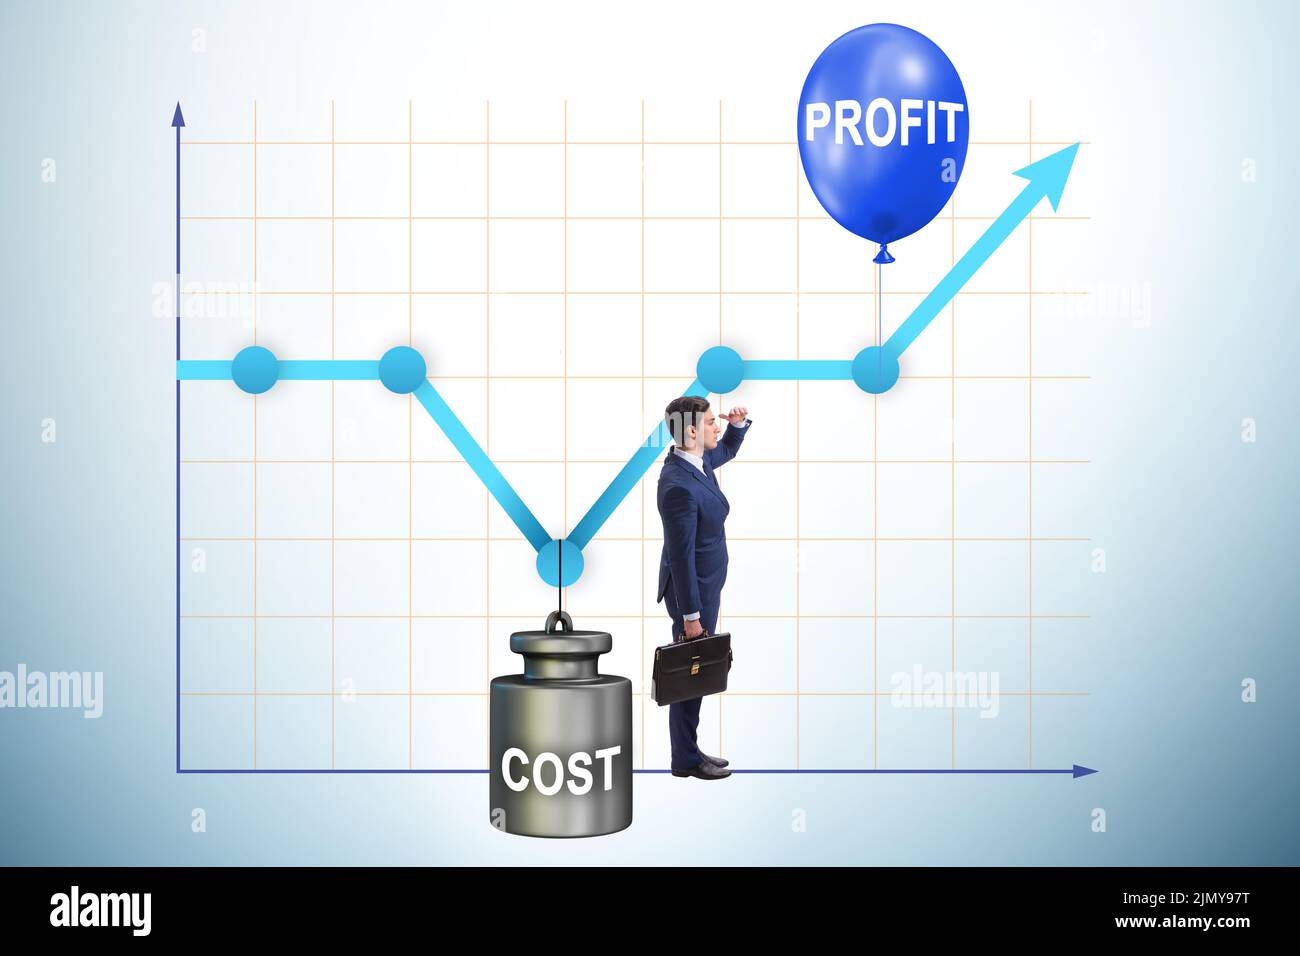 Chart with profit and cost and businessman Stock Photo